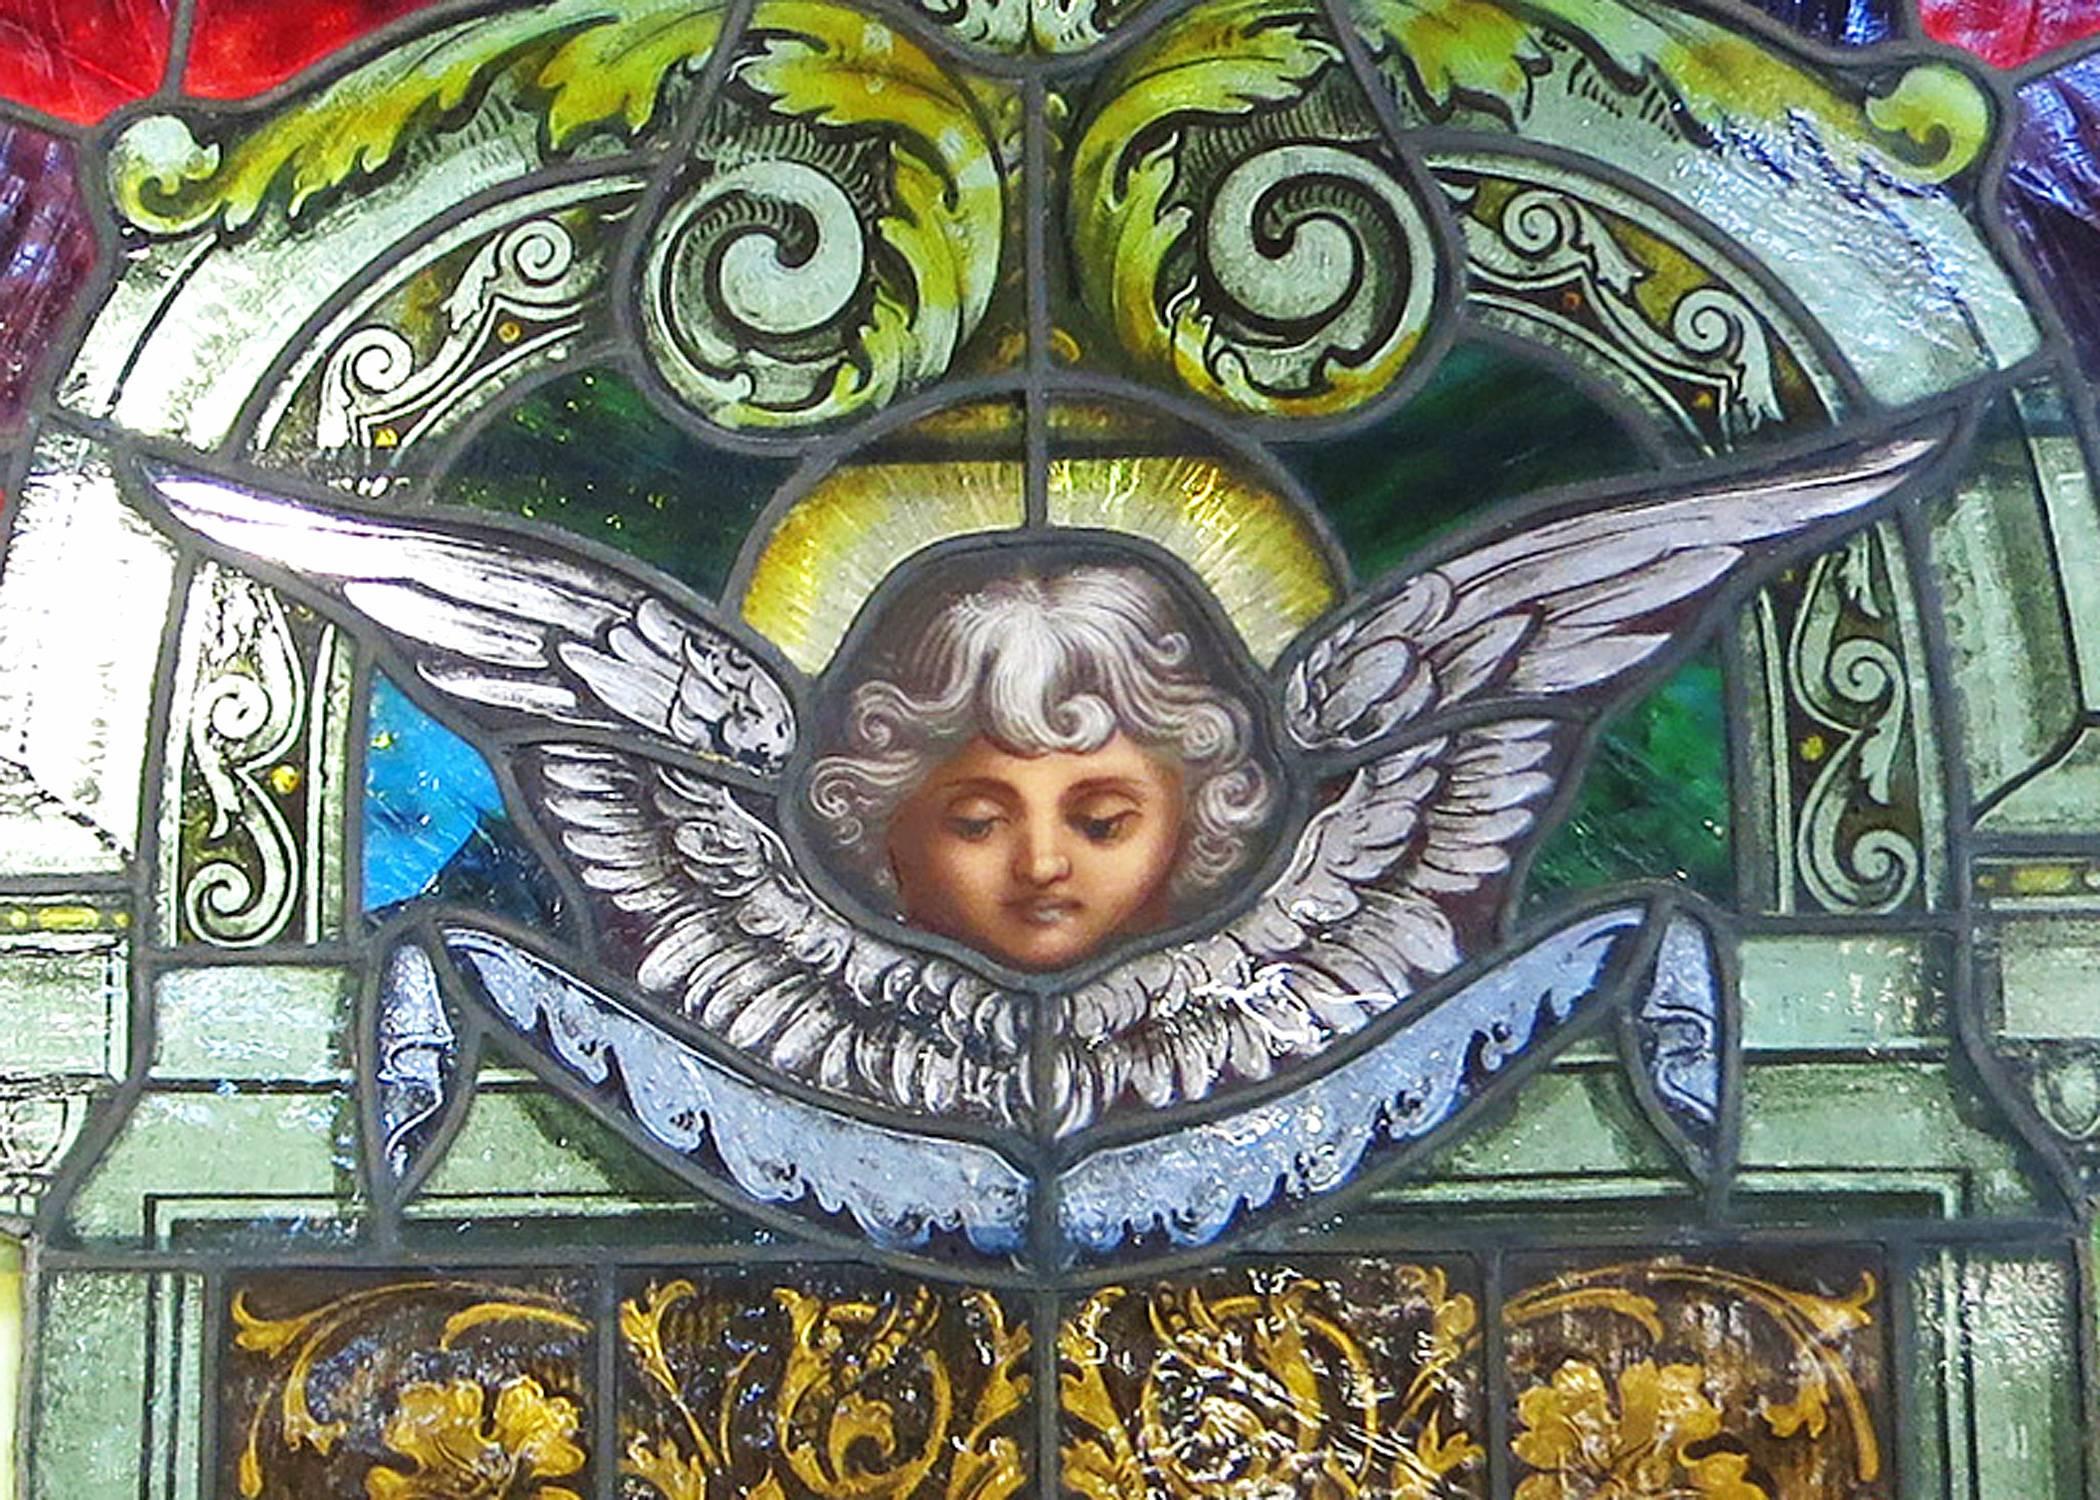 Traditional painted laminated stained arched glass windows with lead joints.

The window features a Cherub within the center surrounded by a pair of columns topped with an archway.